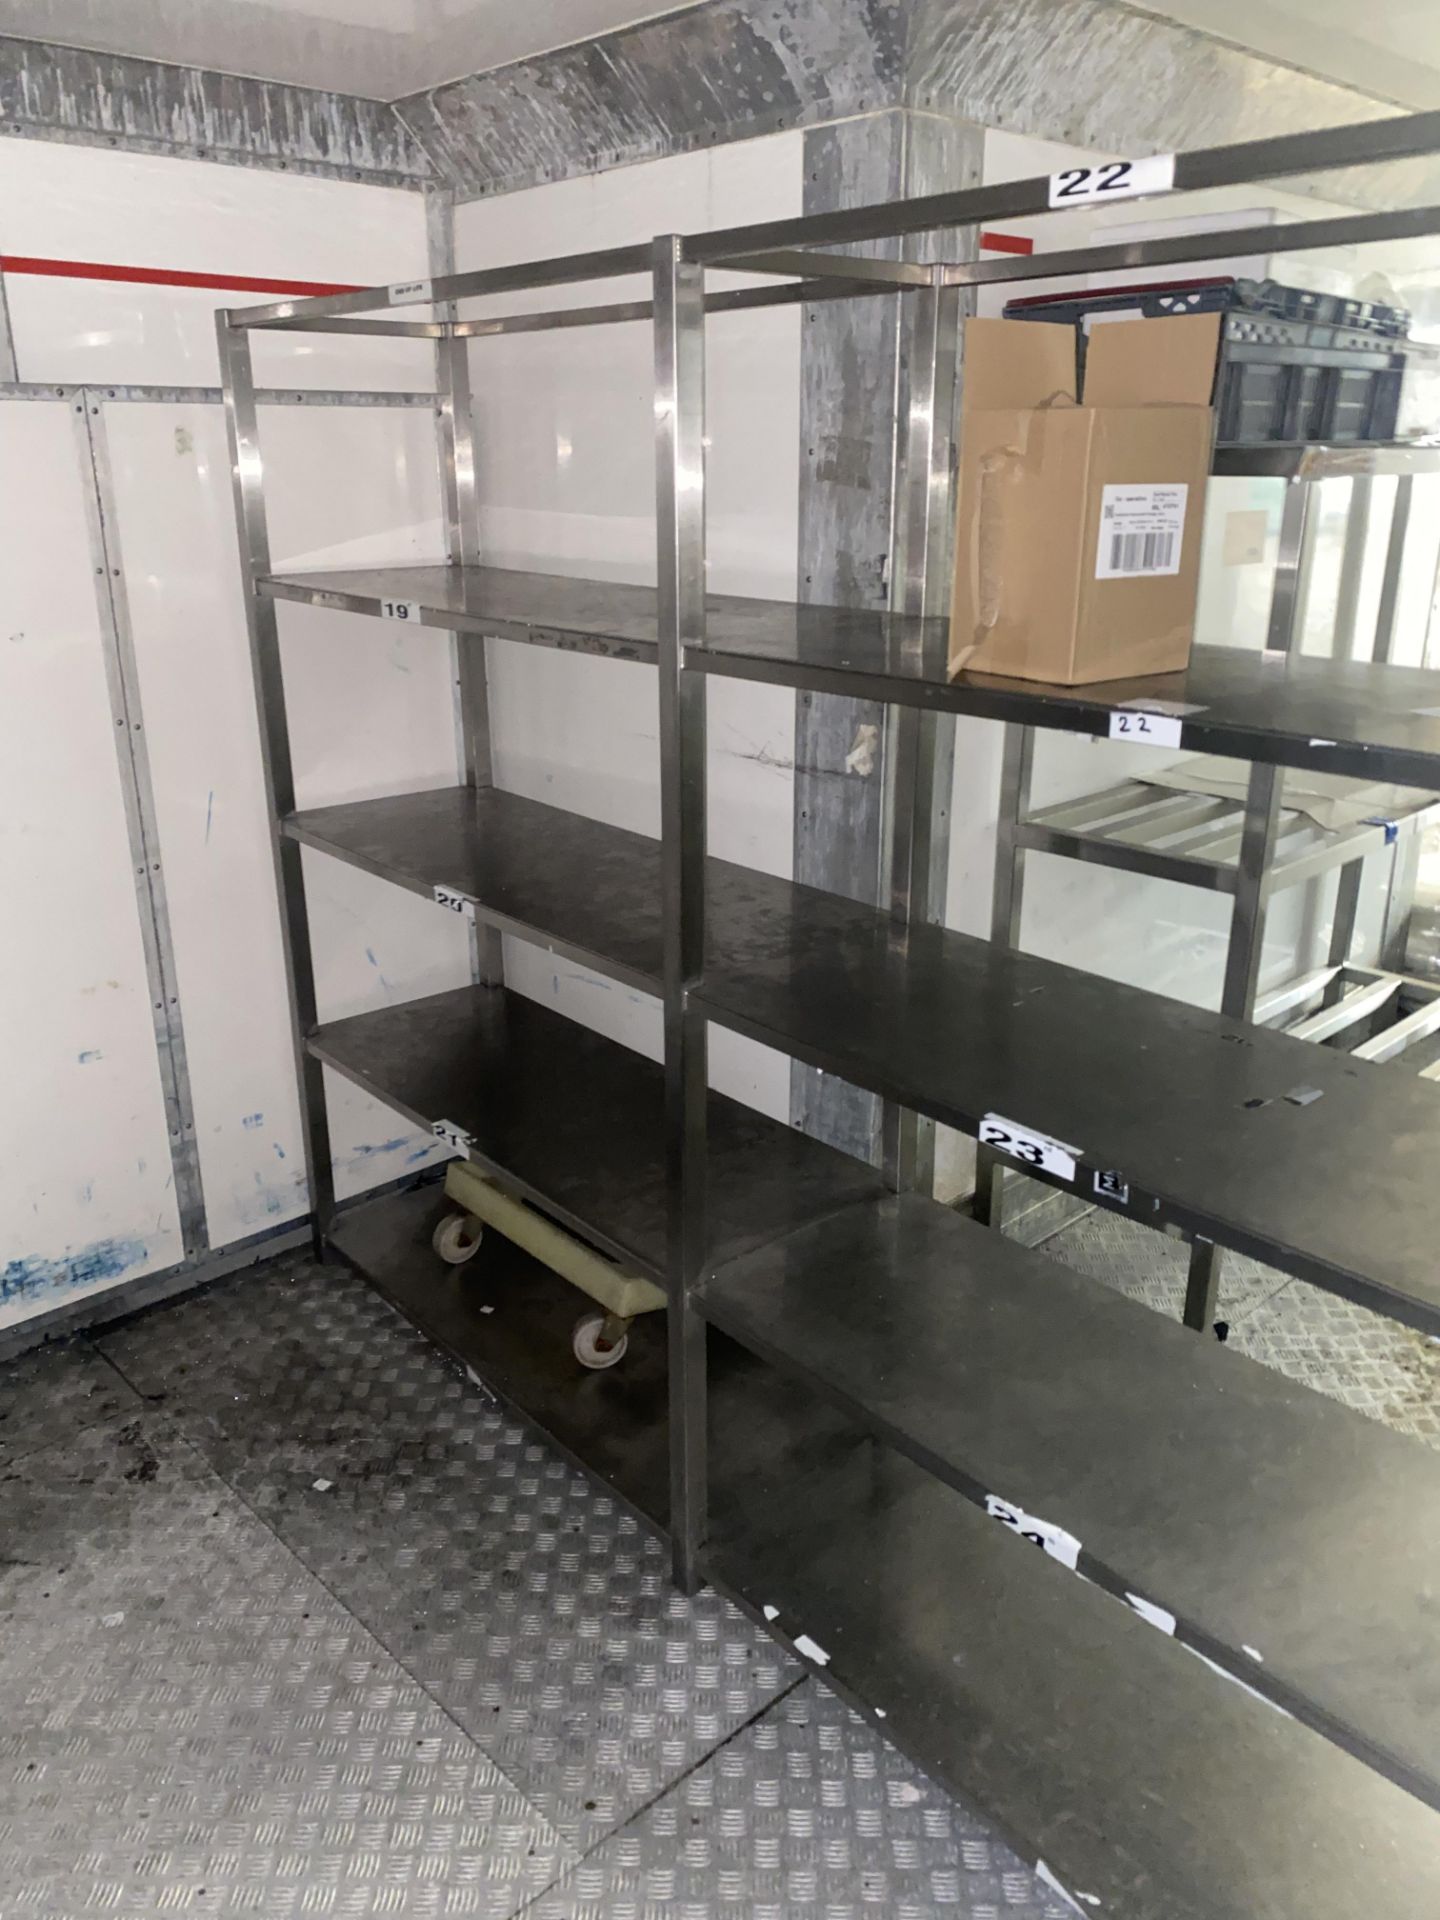 3 Bays of stainless steel racking - Image 3 of 3